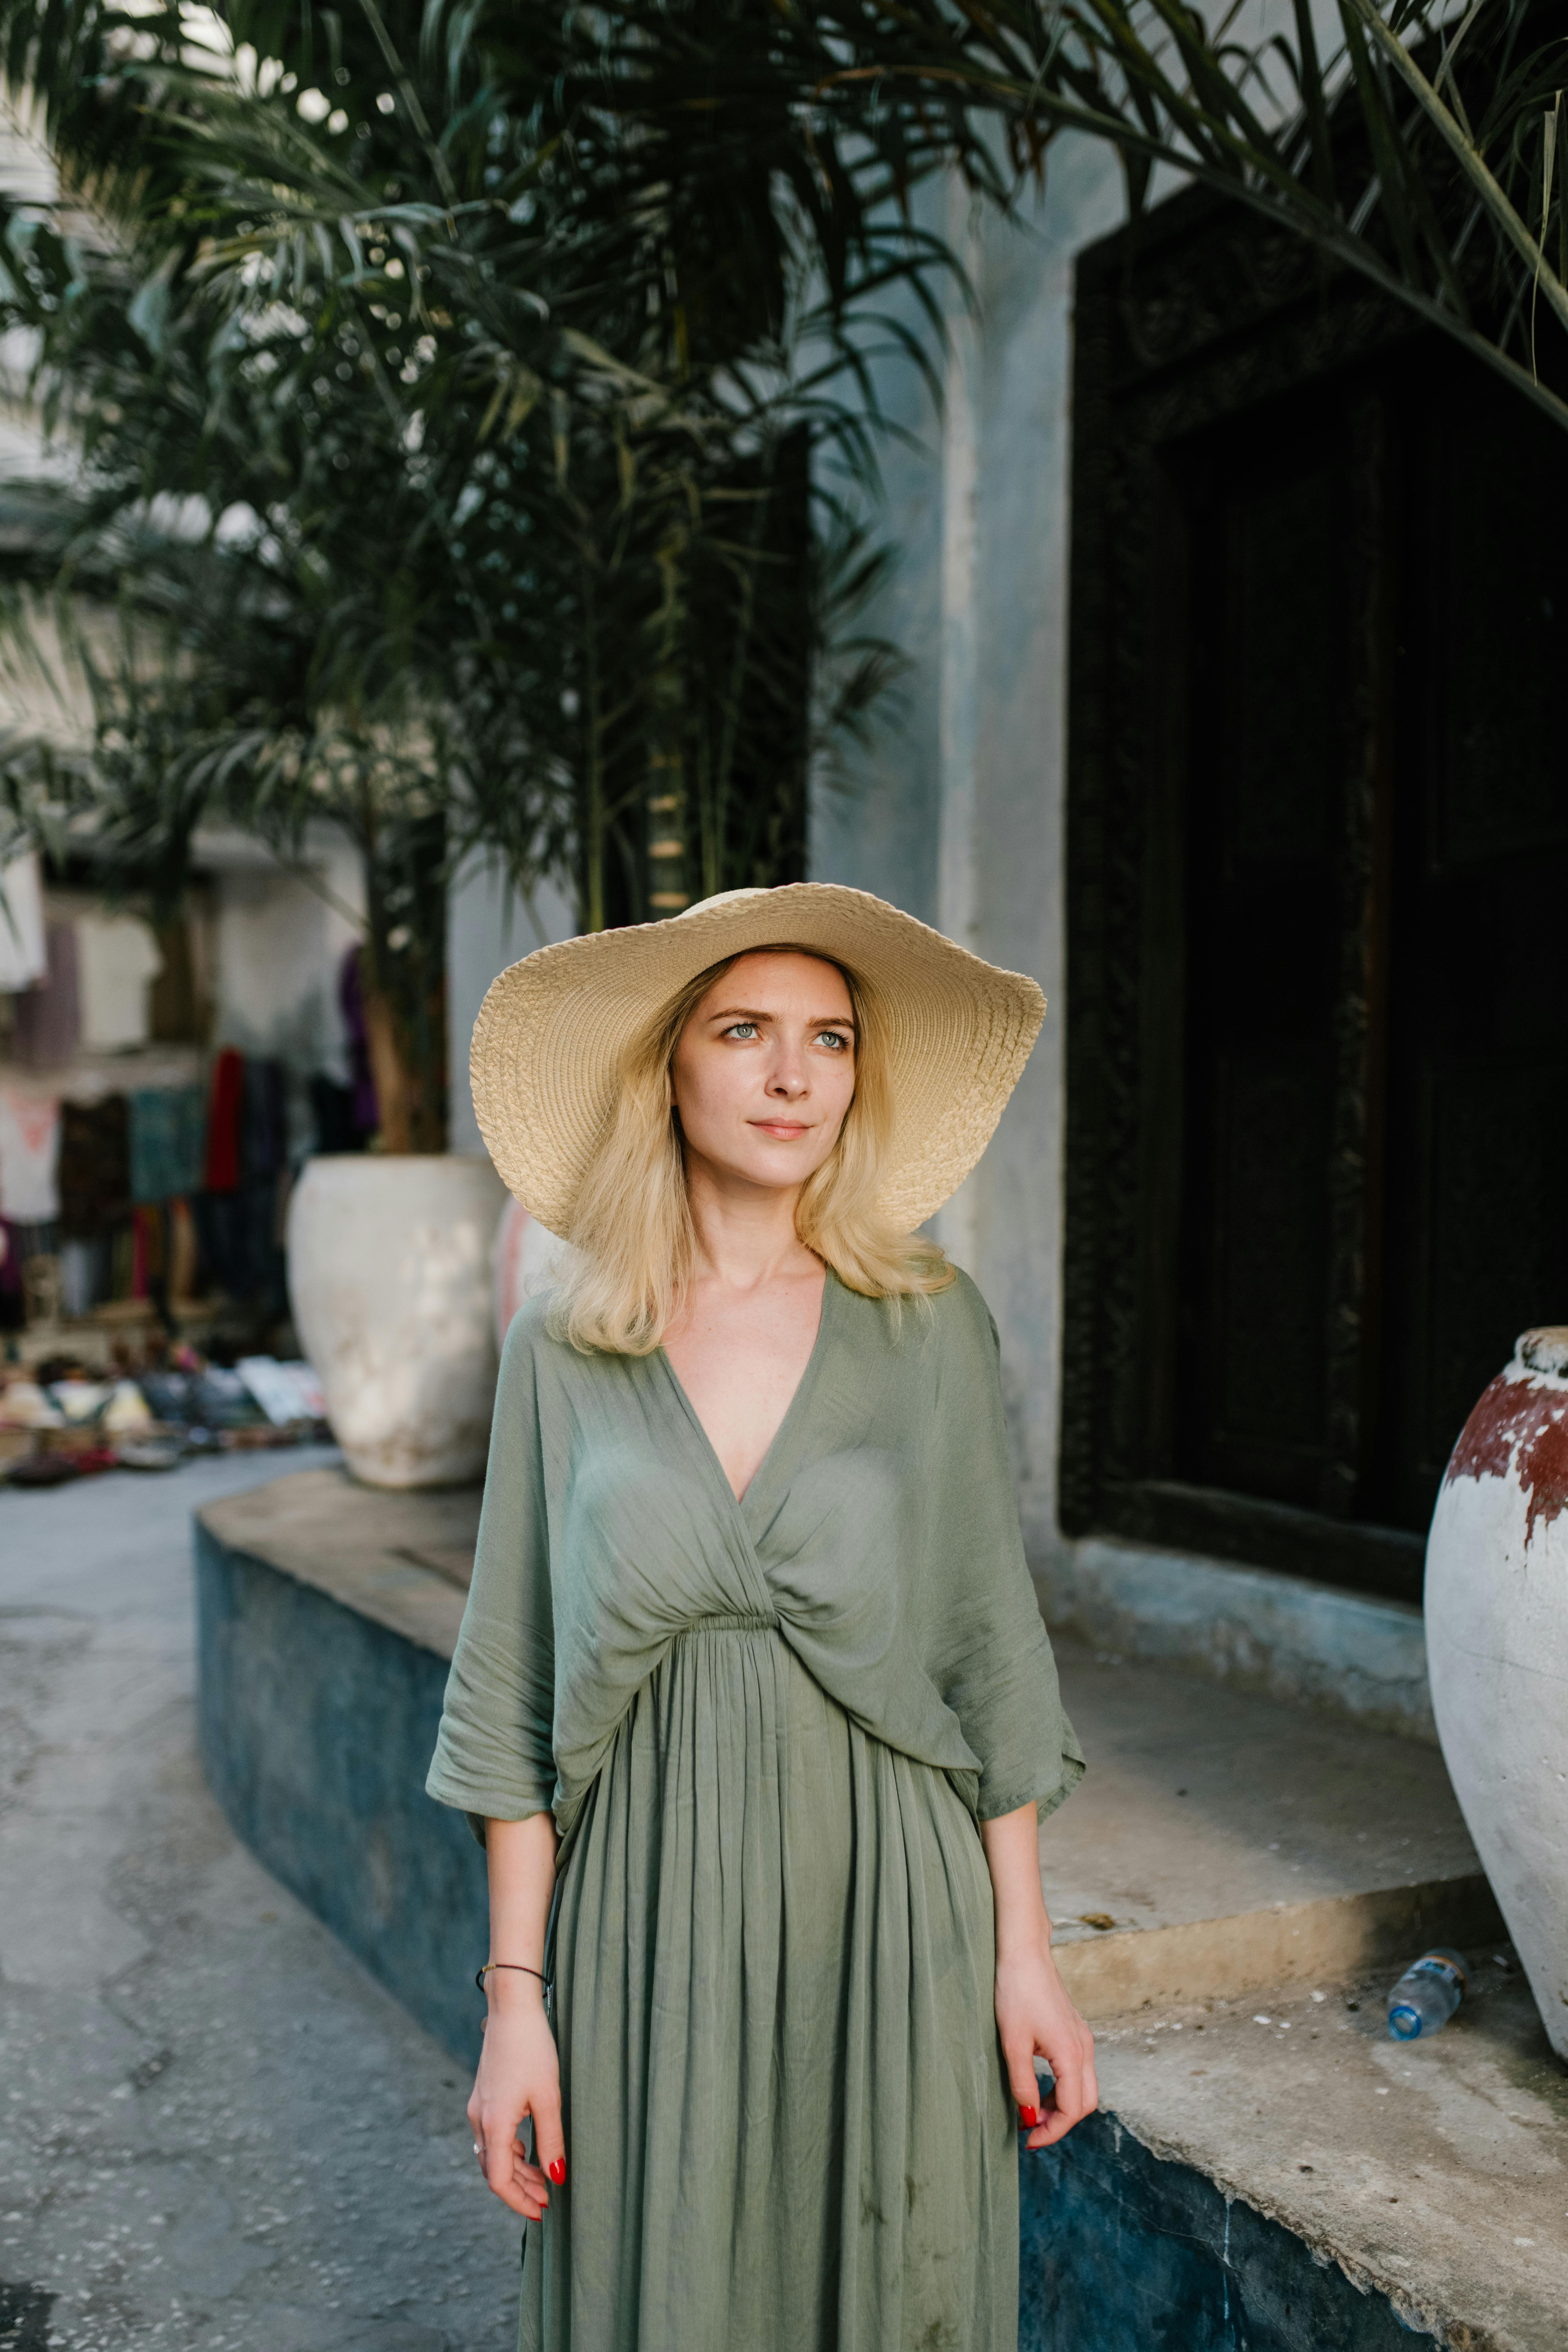 serene woman in straw hat standing near concrete building